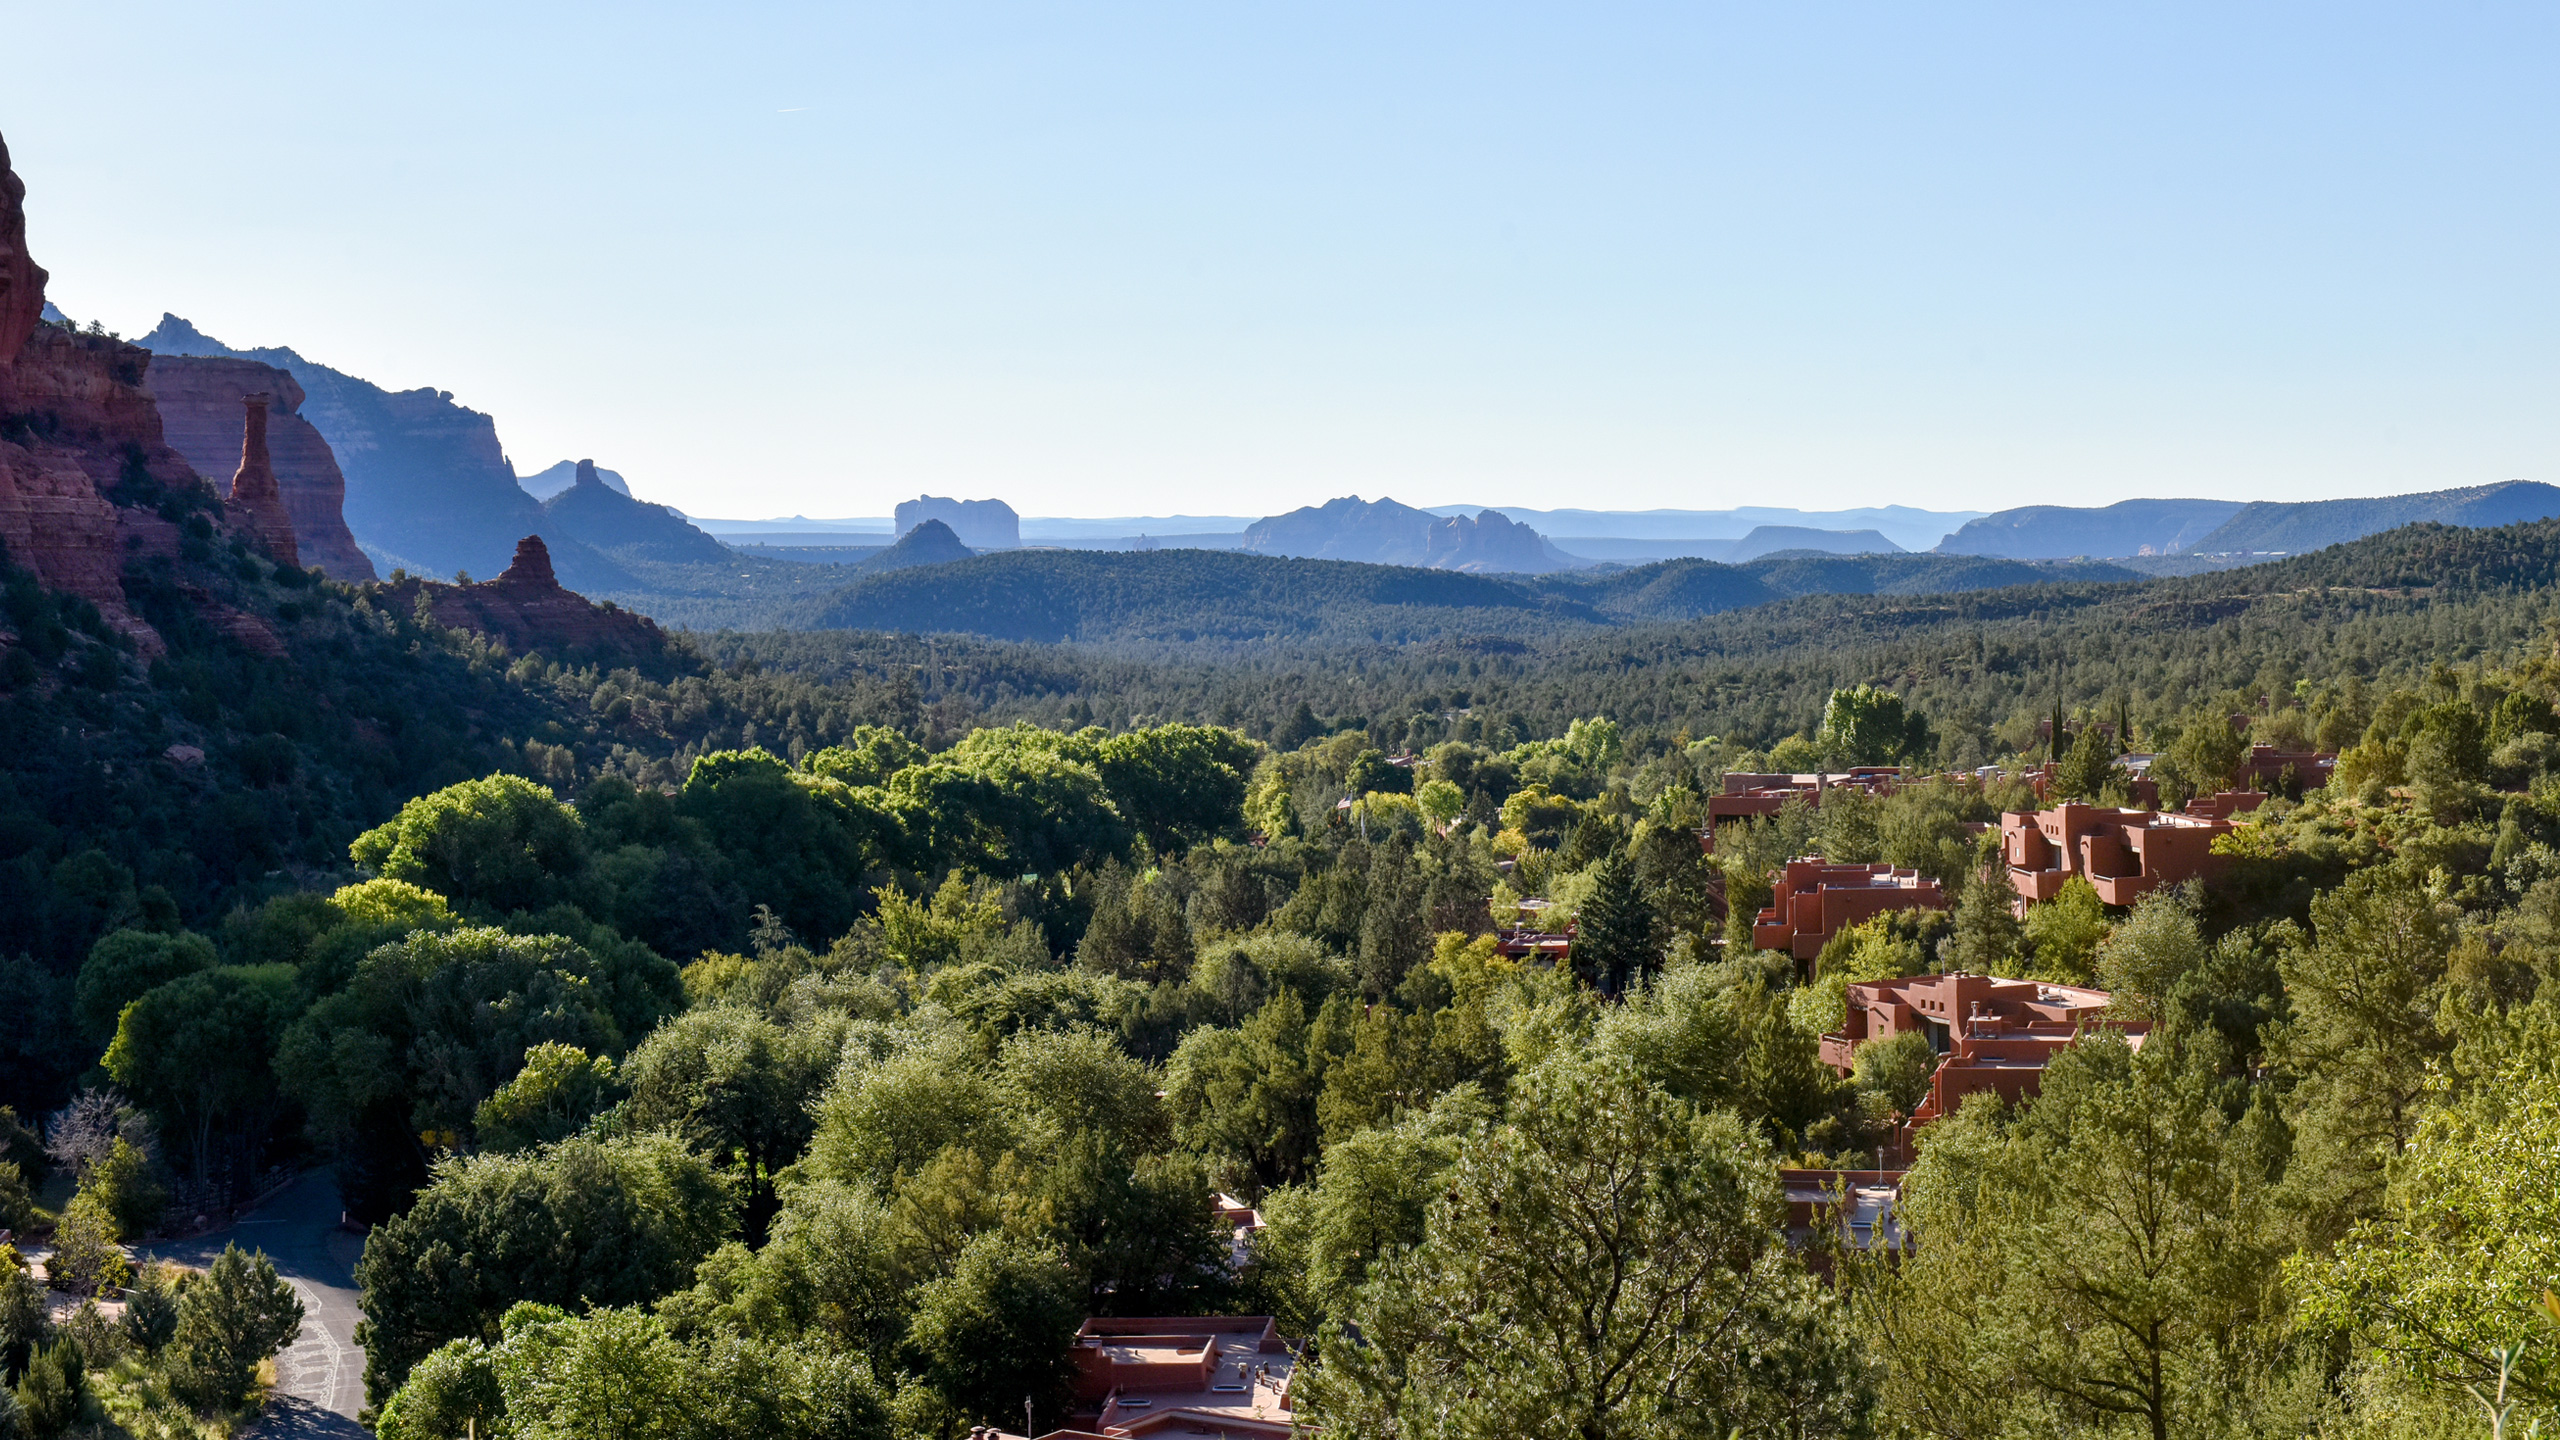 view of lush vegetation and red rock formations